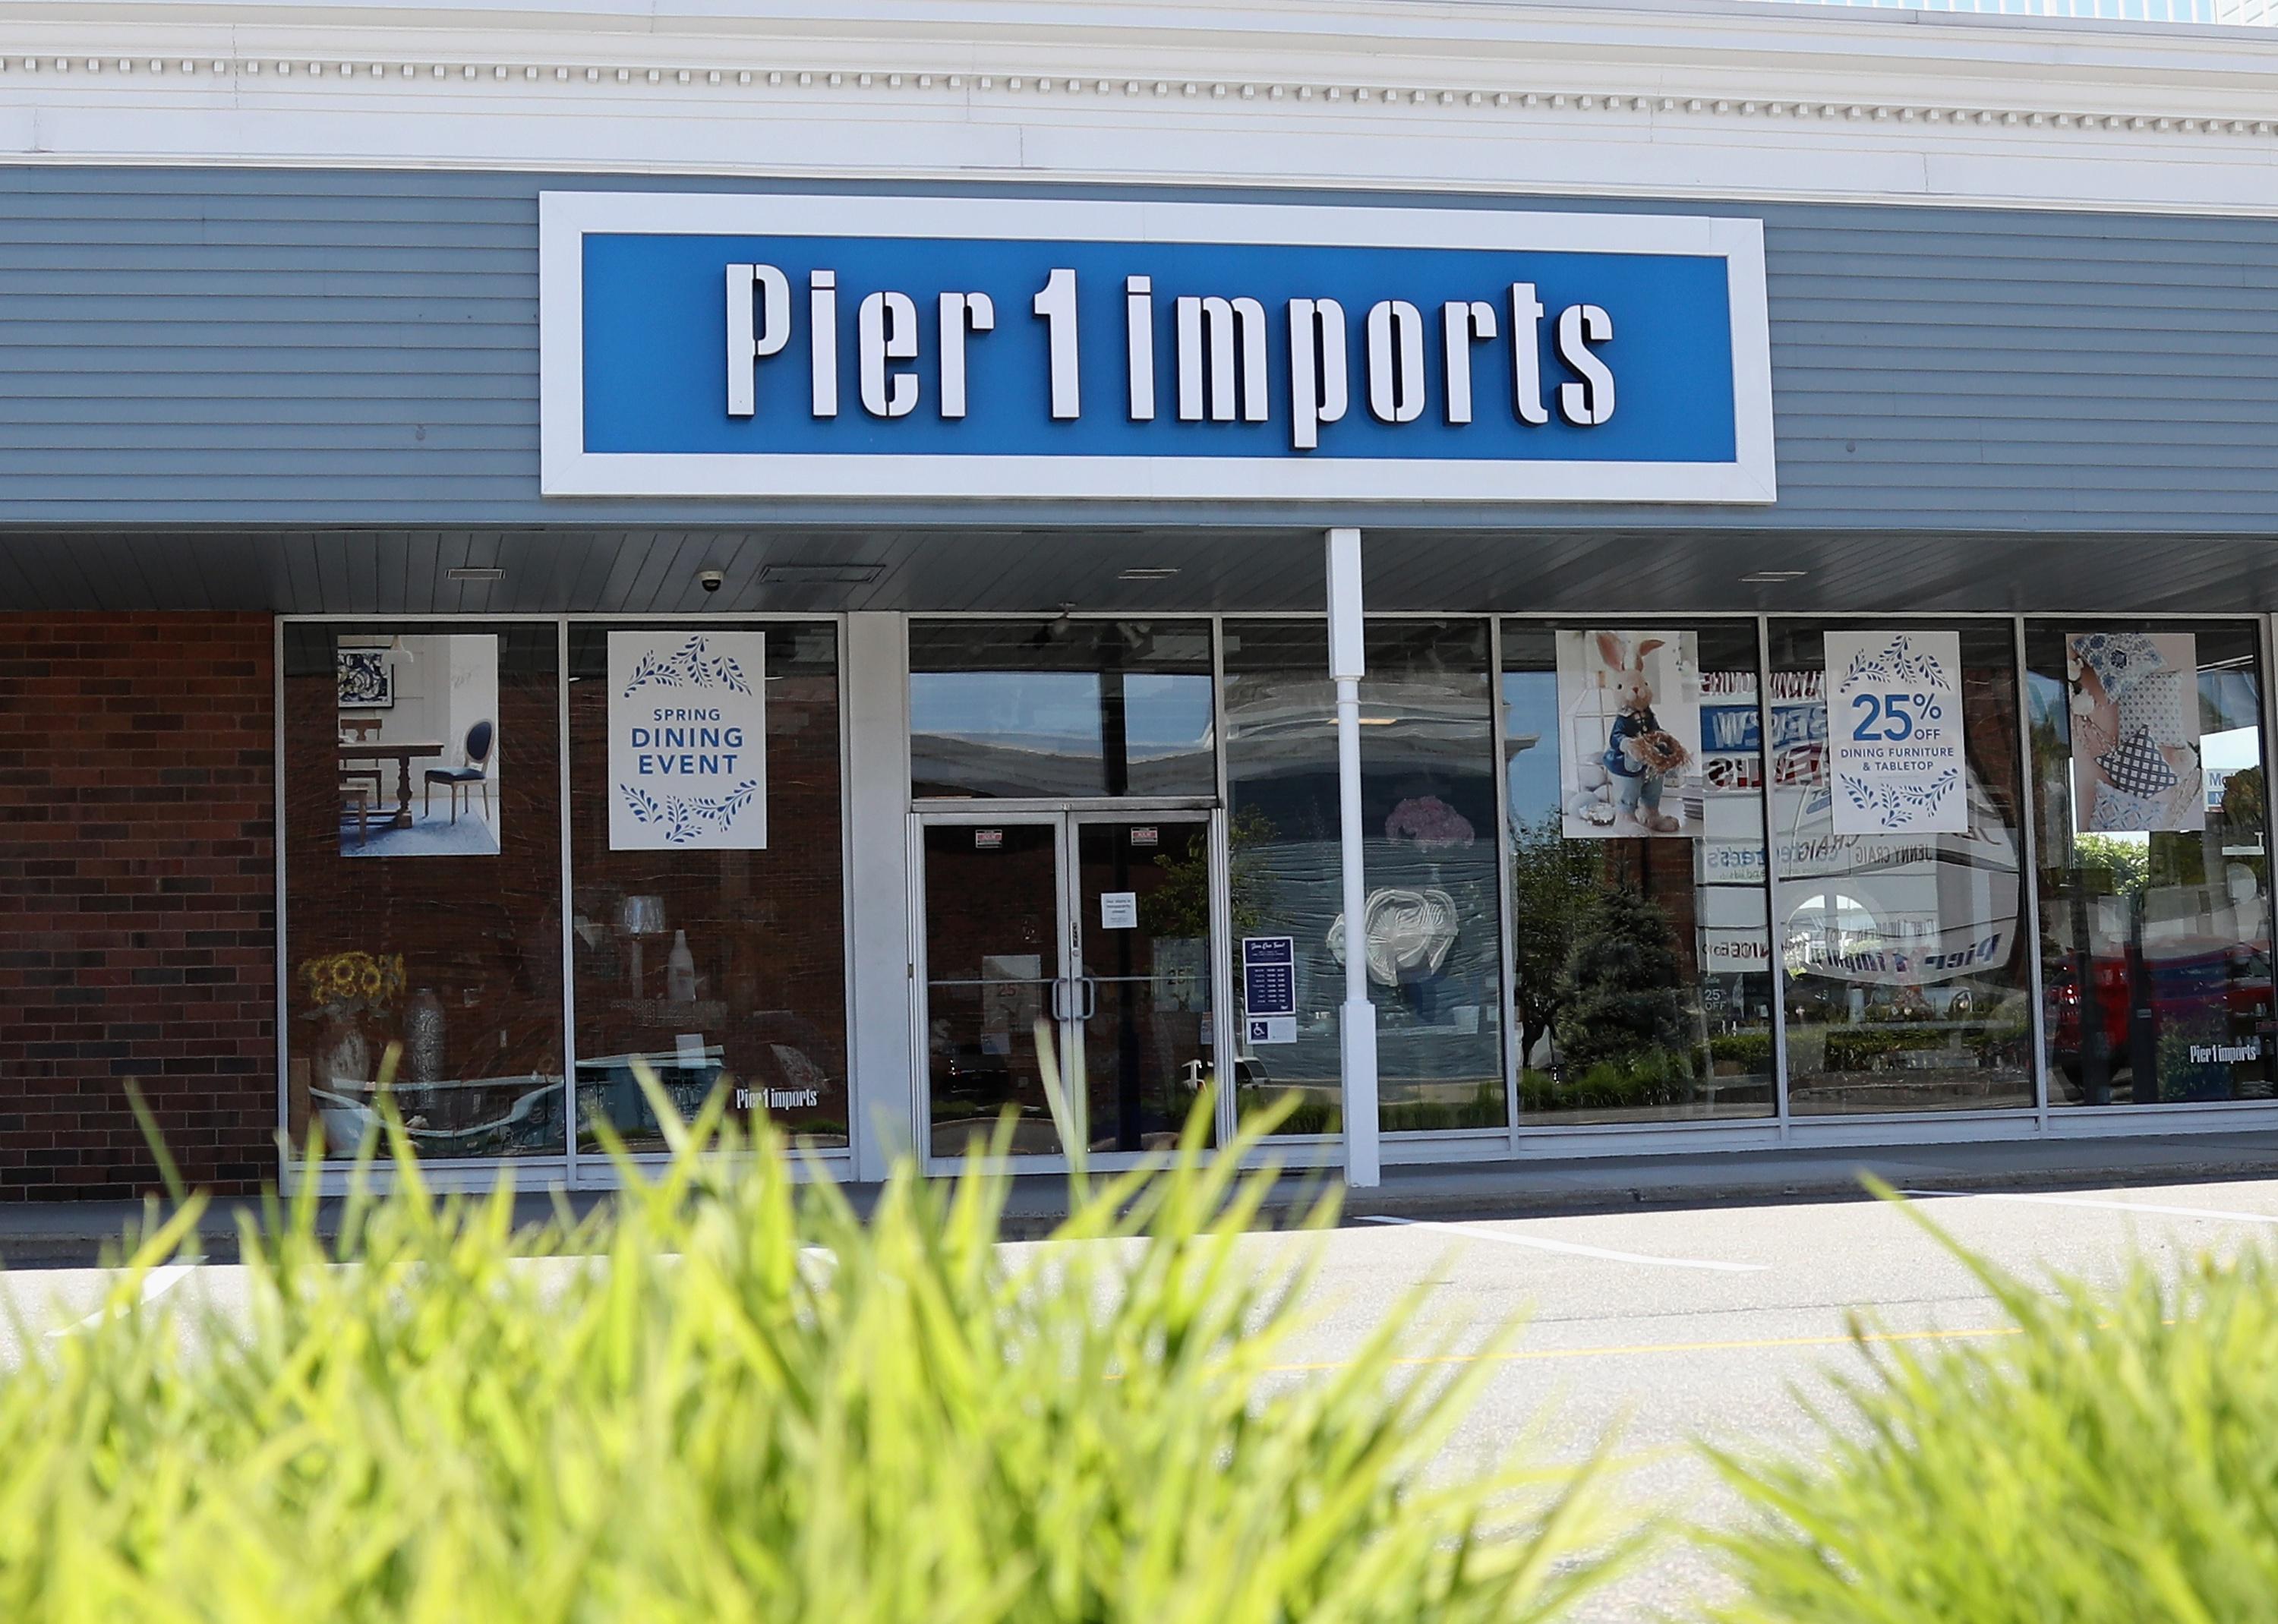 The exterior of a Pier 1 Imports store with a blue and white sign.